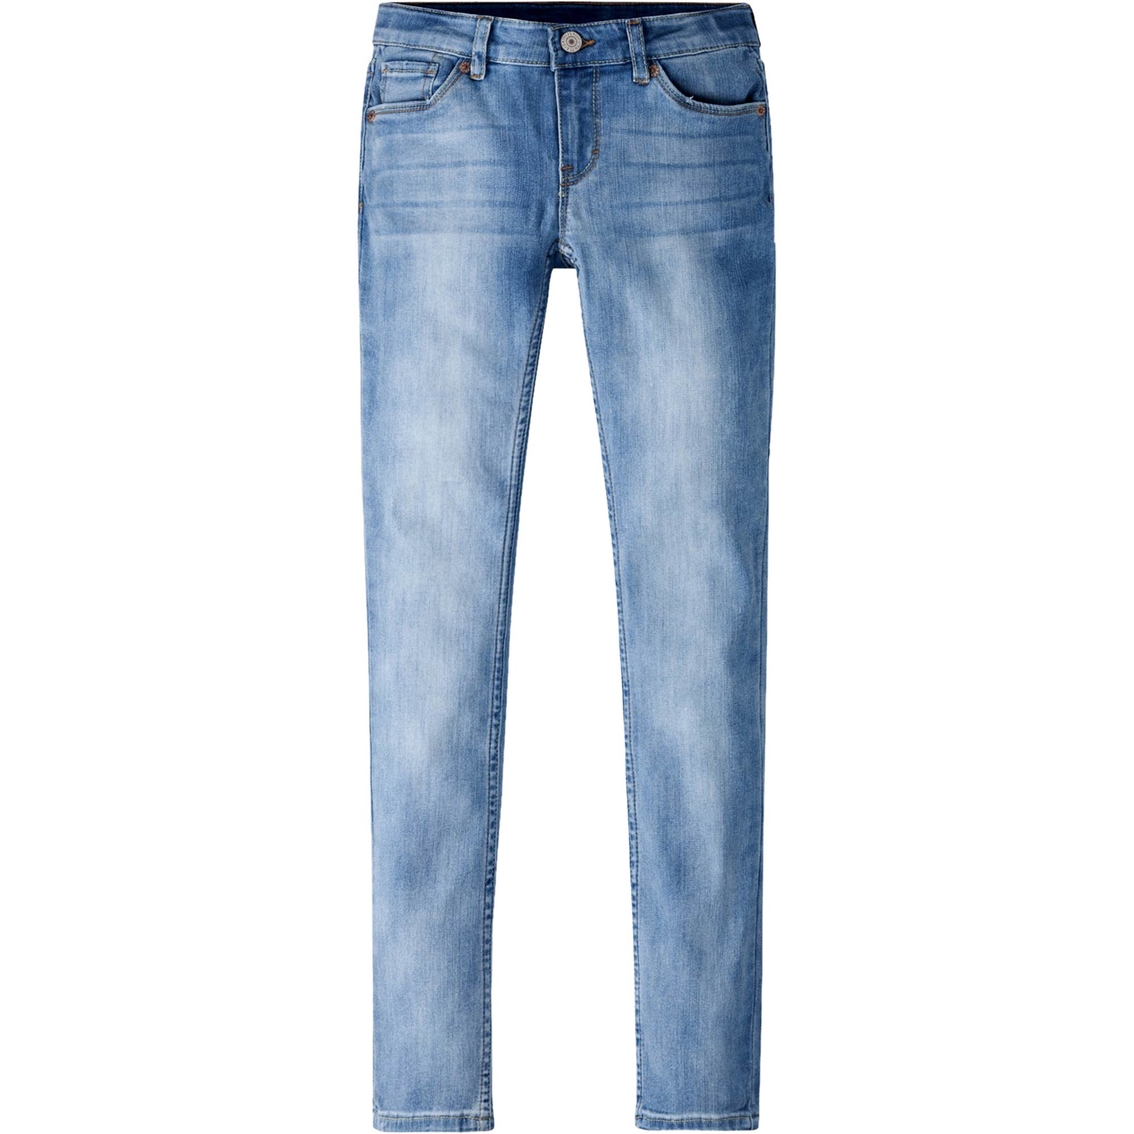 Levi's Girls 711 Skinny Fit Jeans | Girls 7-16 | Apparel | Shop The ...